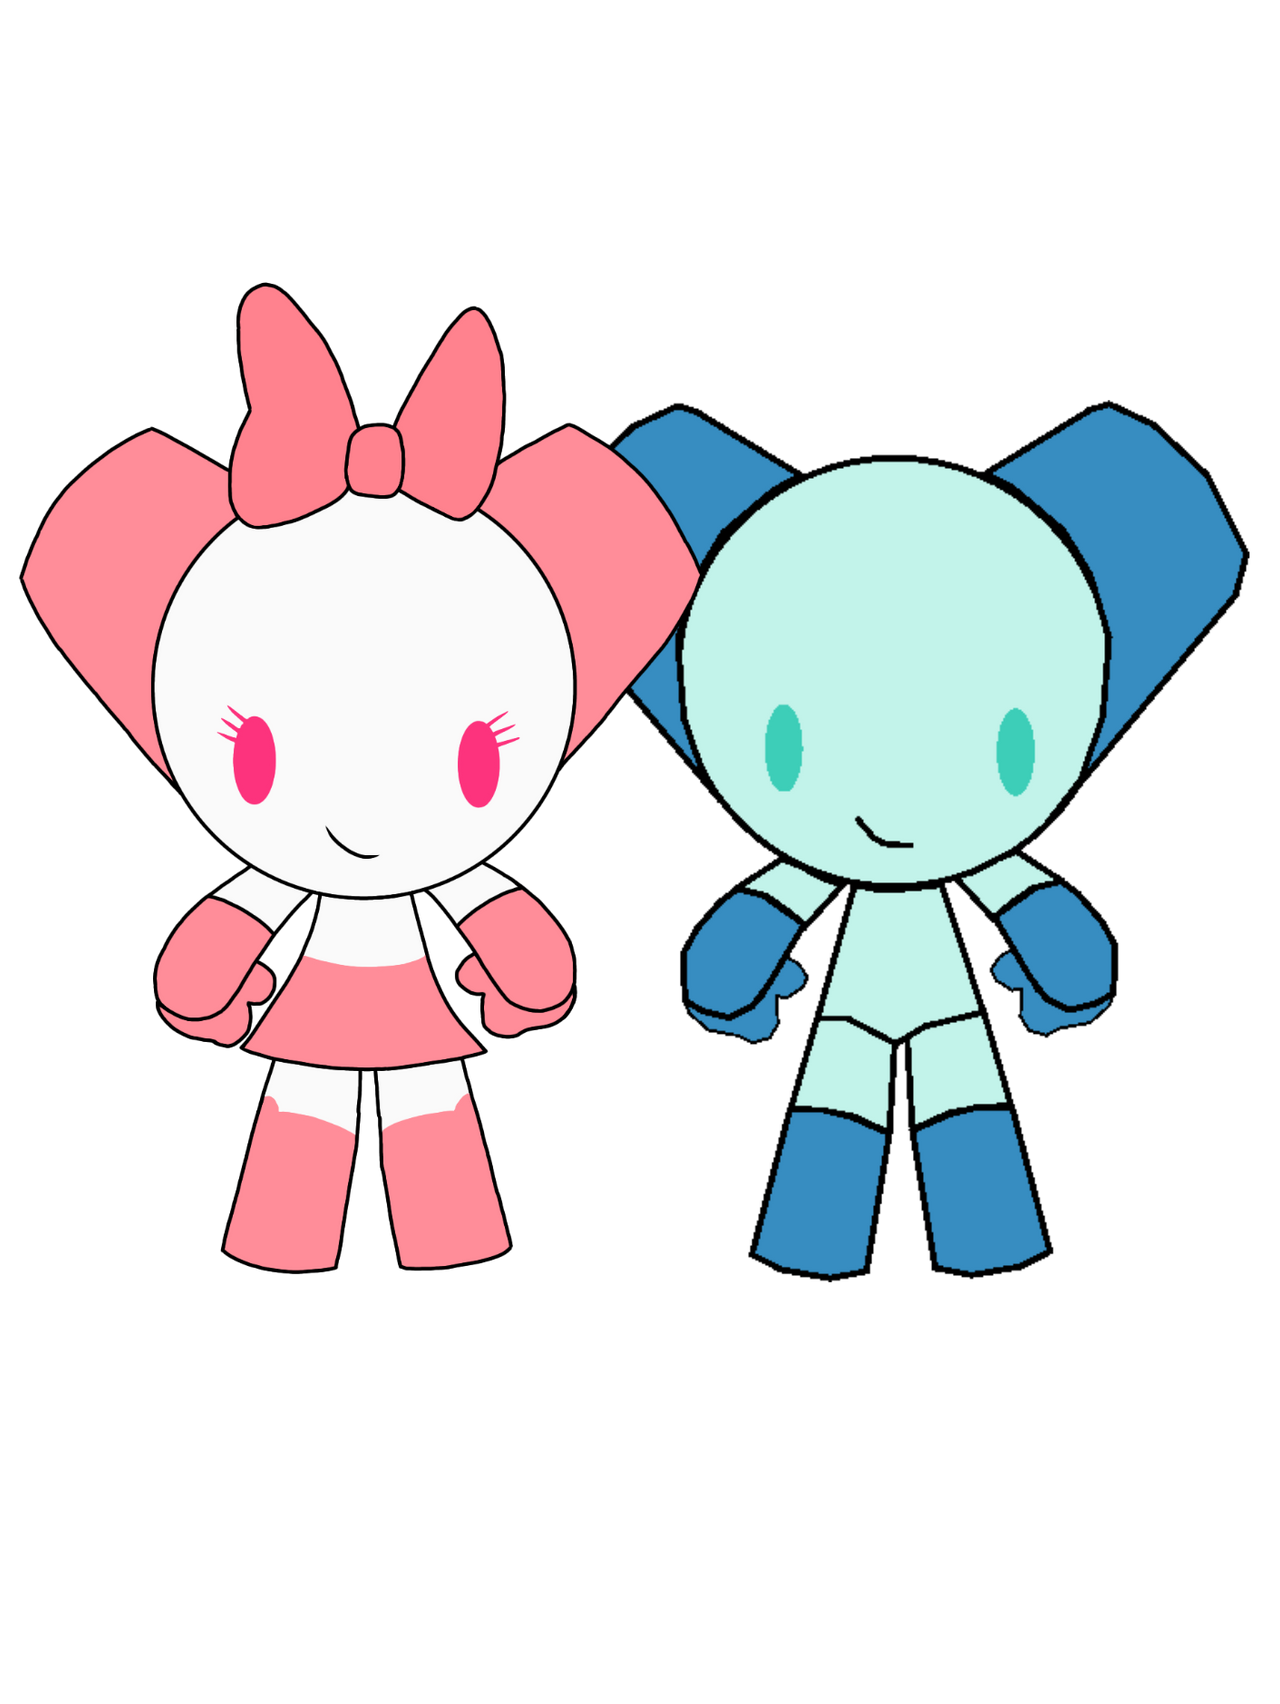 Robotboy png images